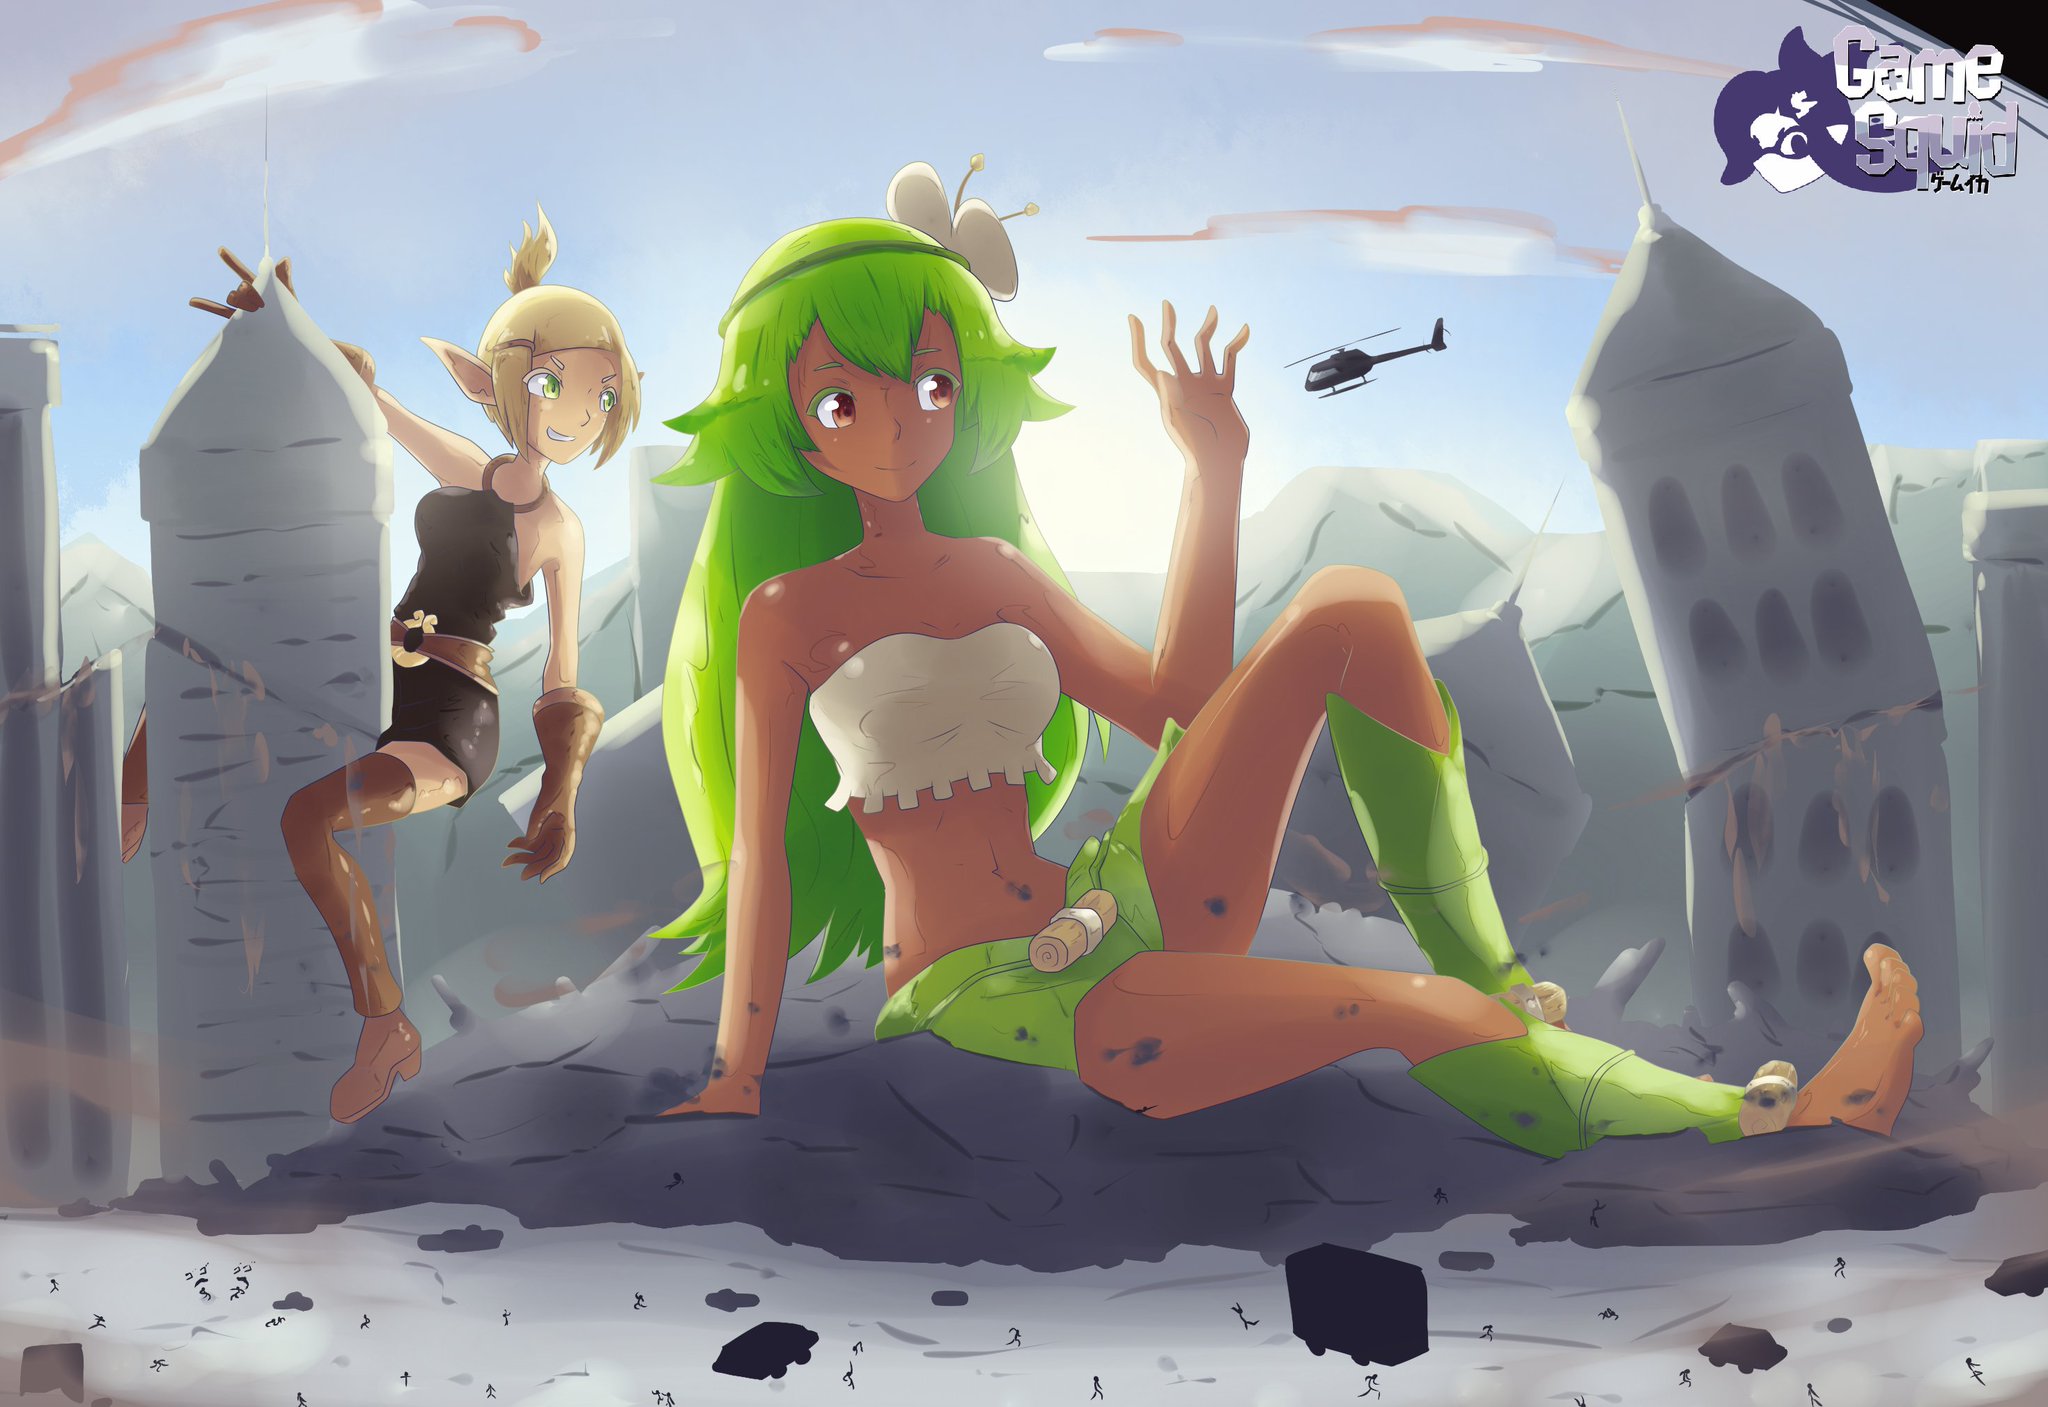 “Commissioned by @kinkaras.
A Wakfu picture with Amalia and Evangel...